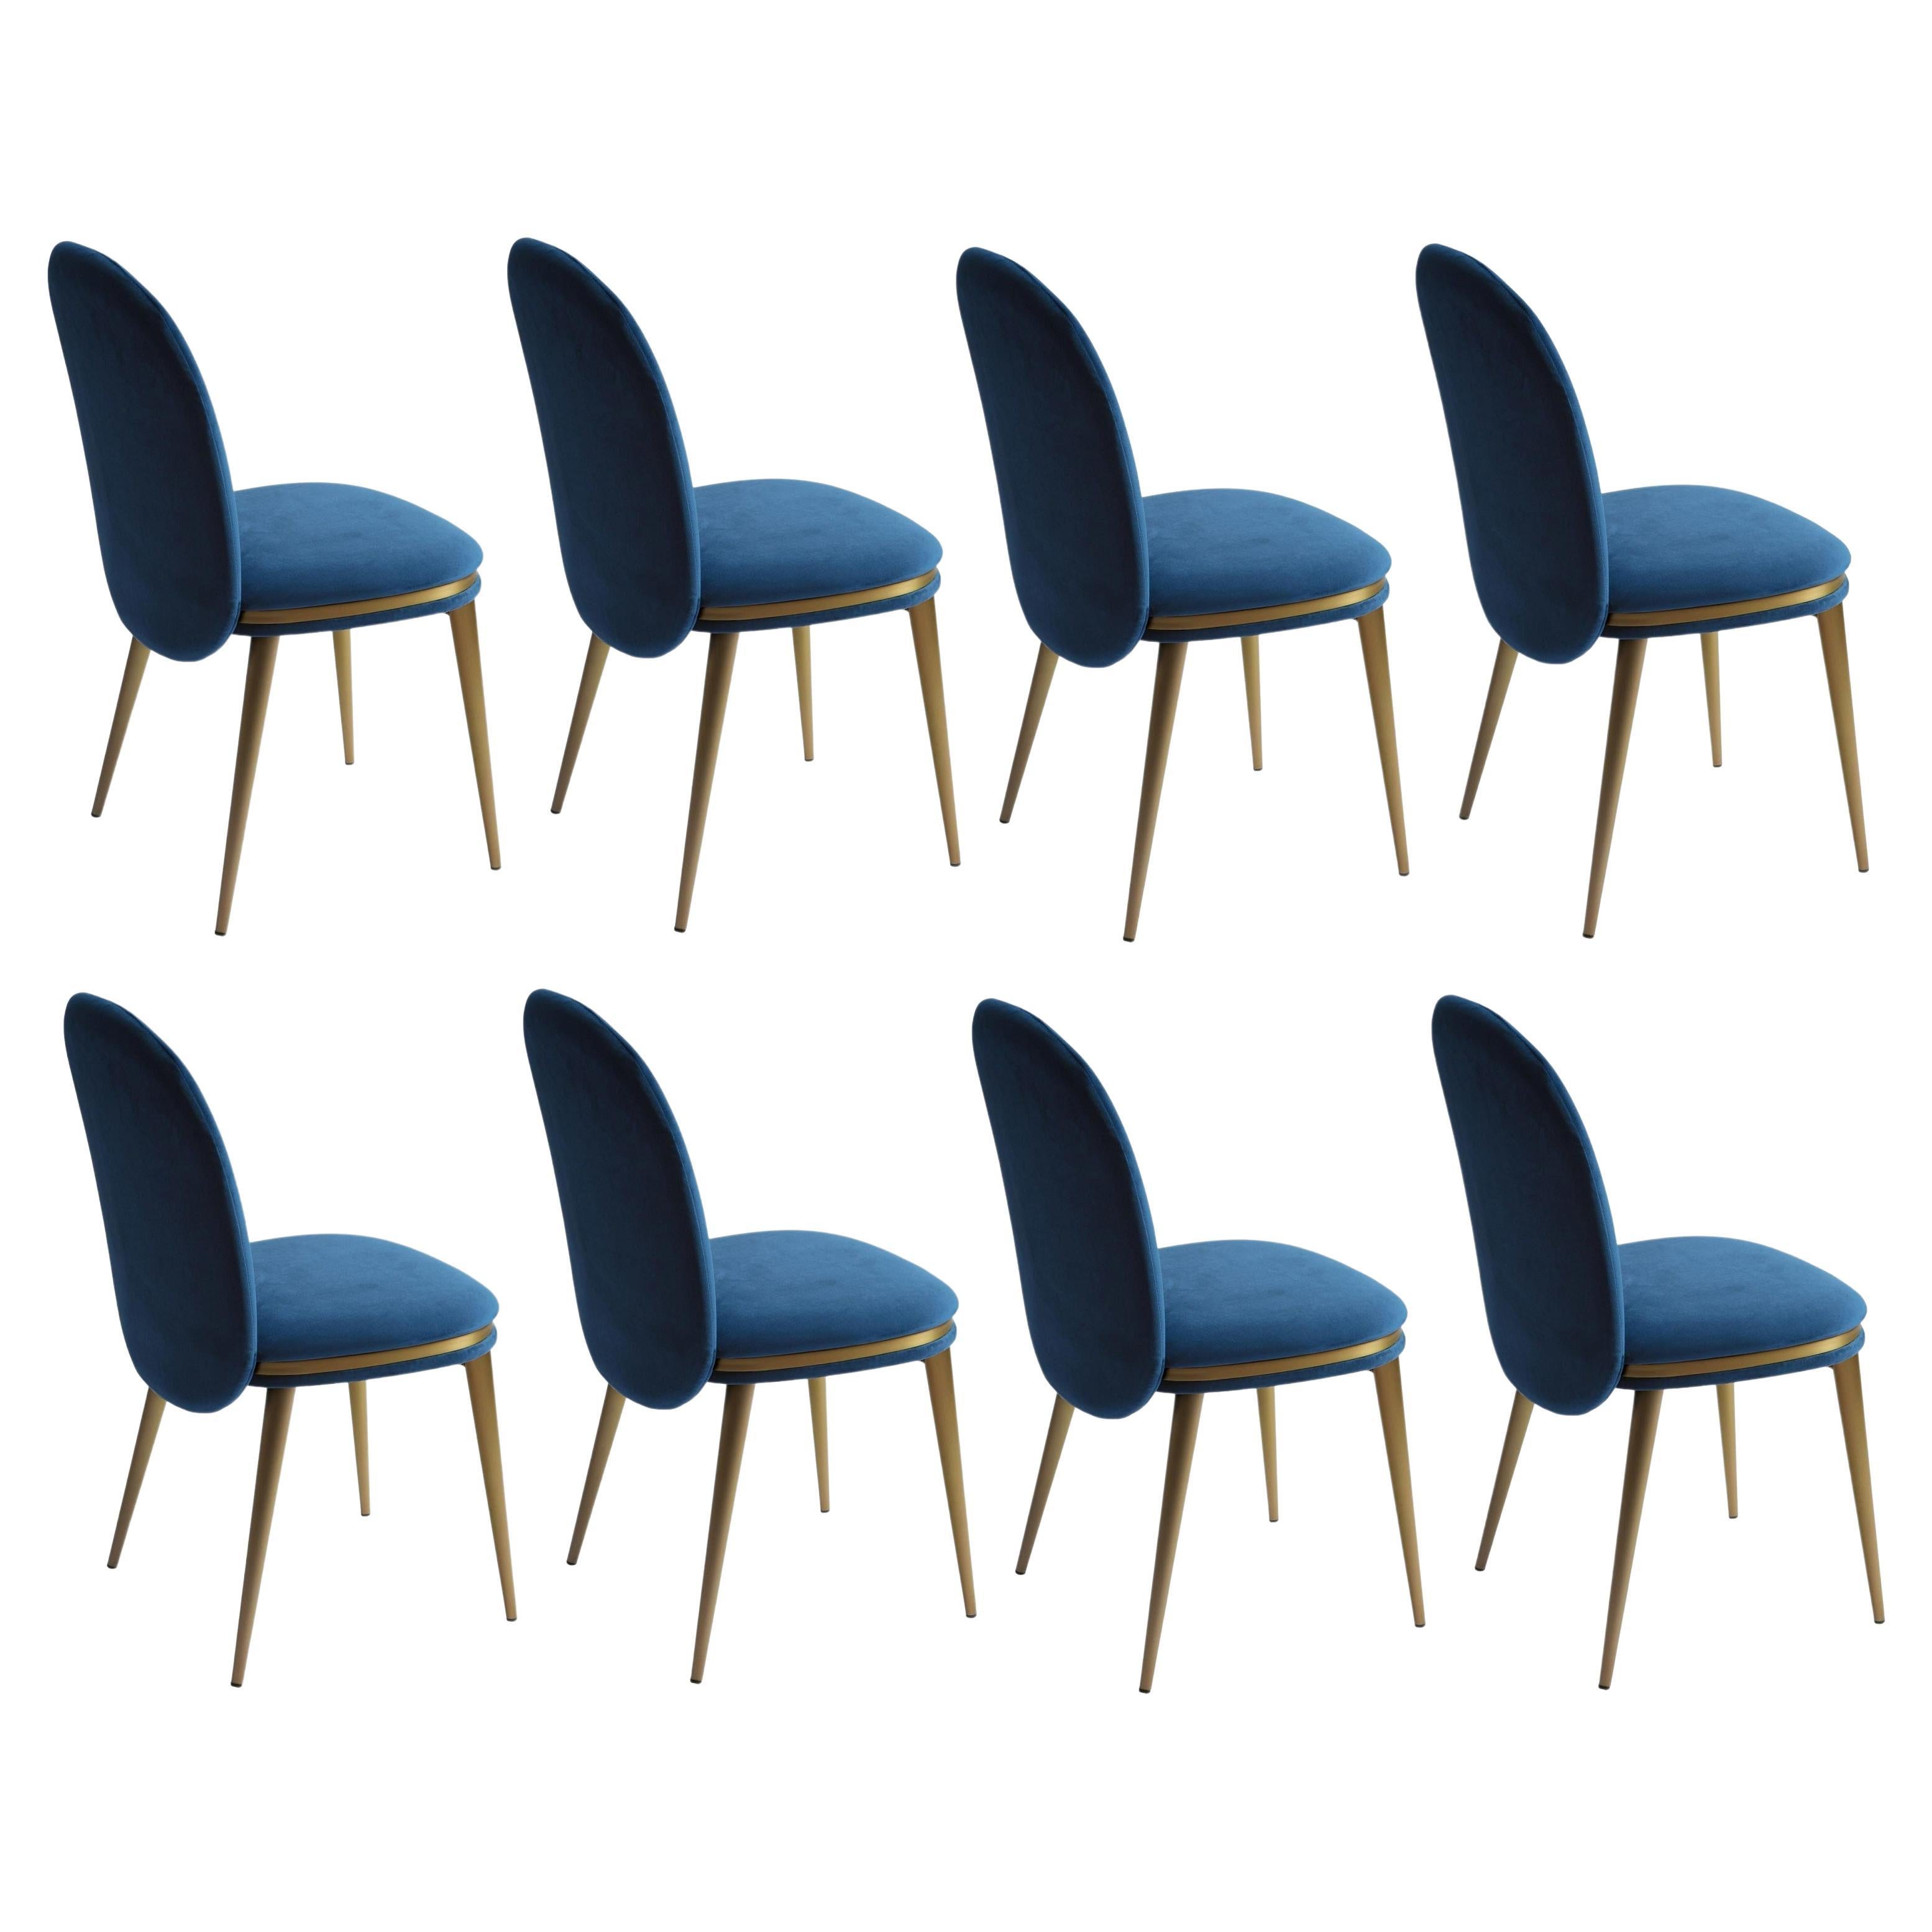 Italian Made to Order Dining Chairs Offered in Velvet, Set of 8